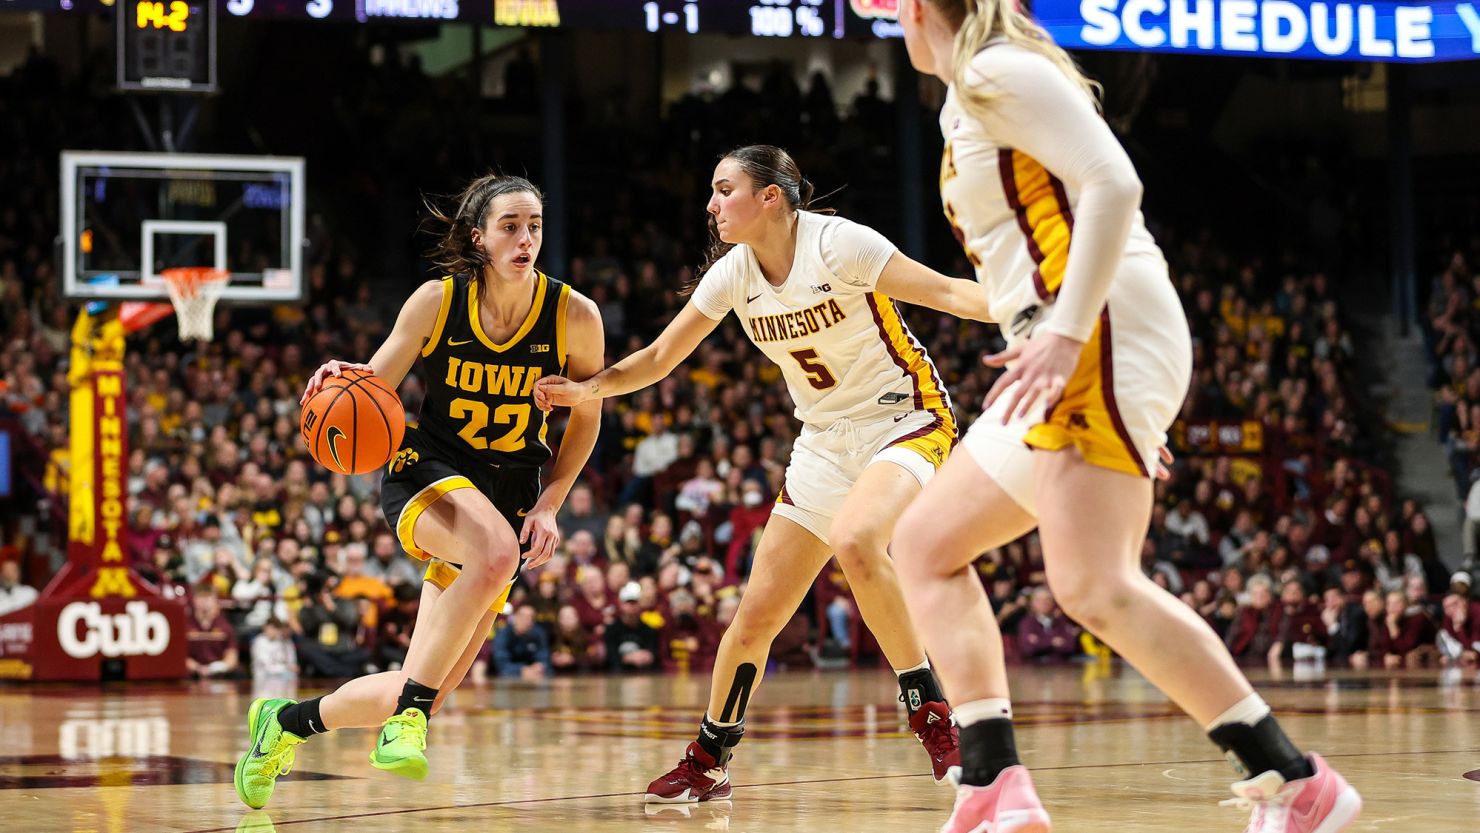 Iowa Hawkeyes guard Caitlin Clark dribbles while being defended by Minnesota Golden Gophers guard Maggie Czinano (5) during the second half at Williams Arena.